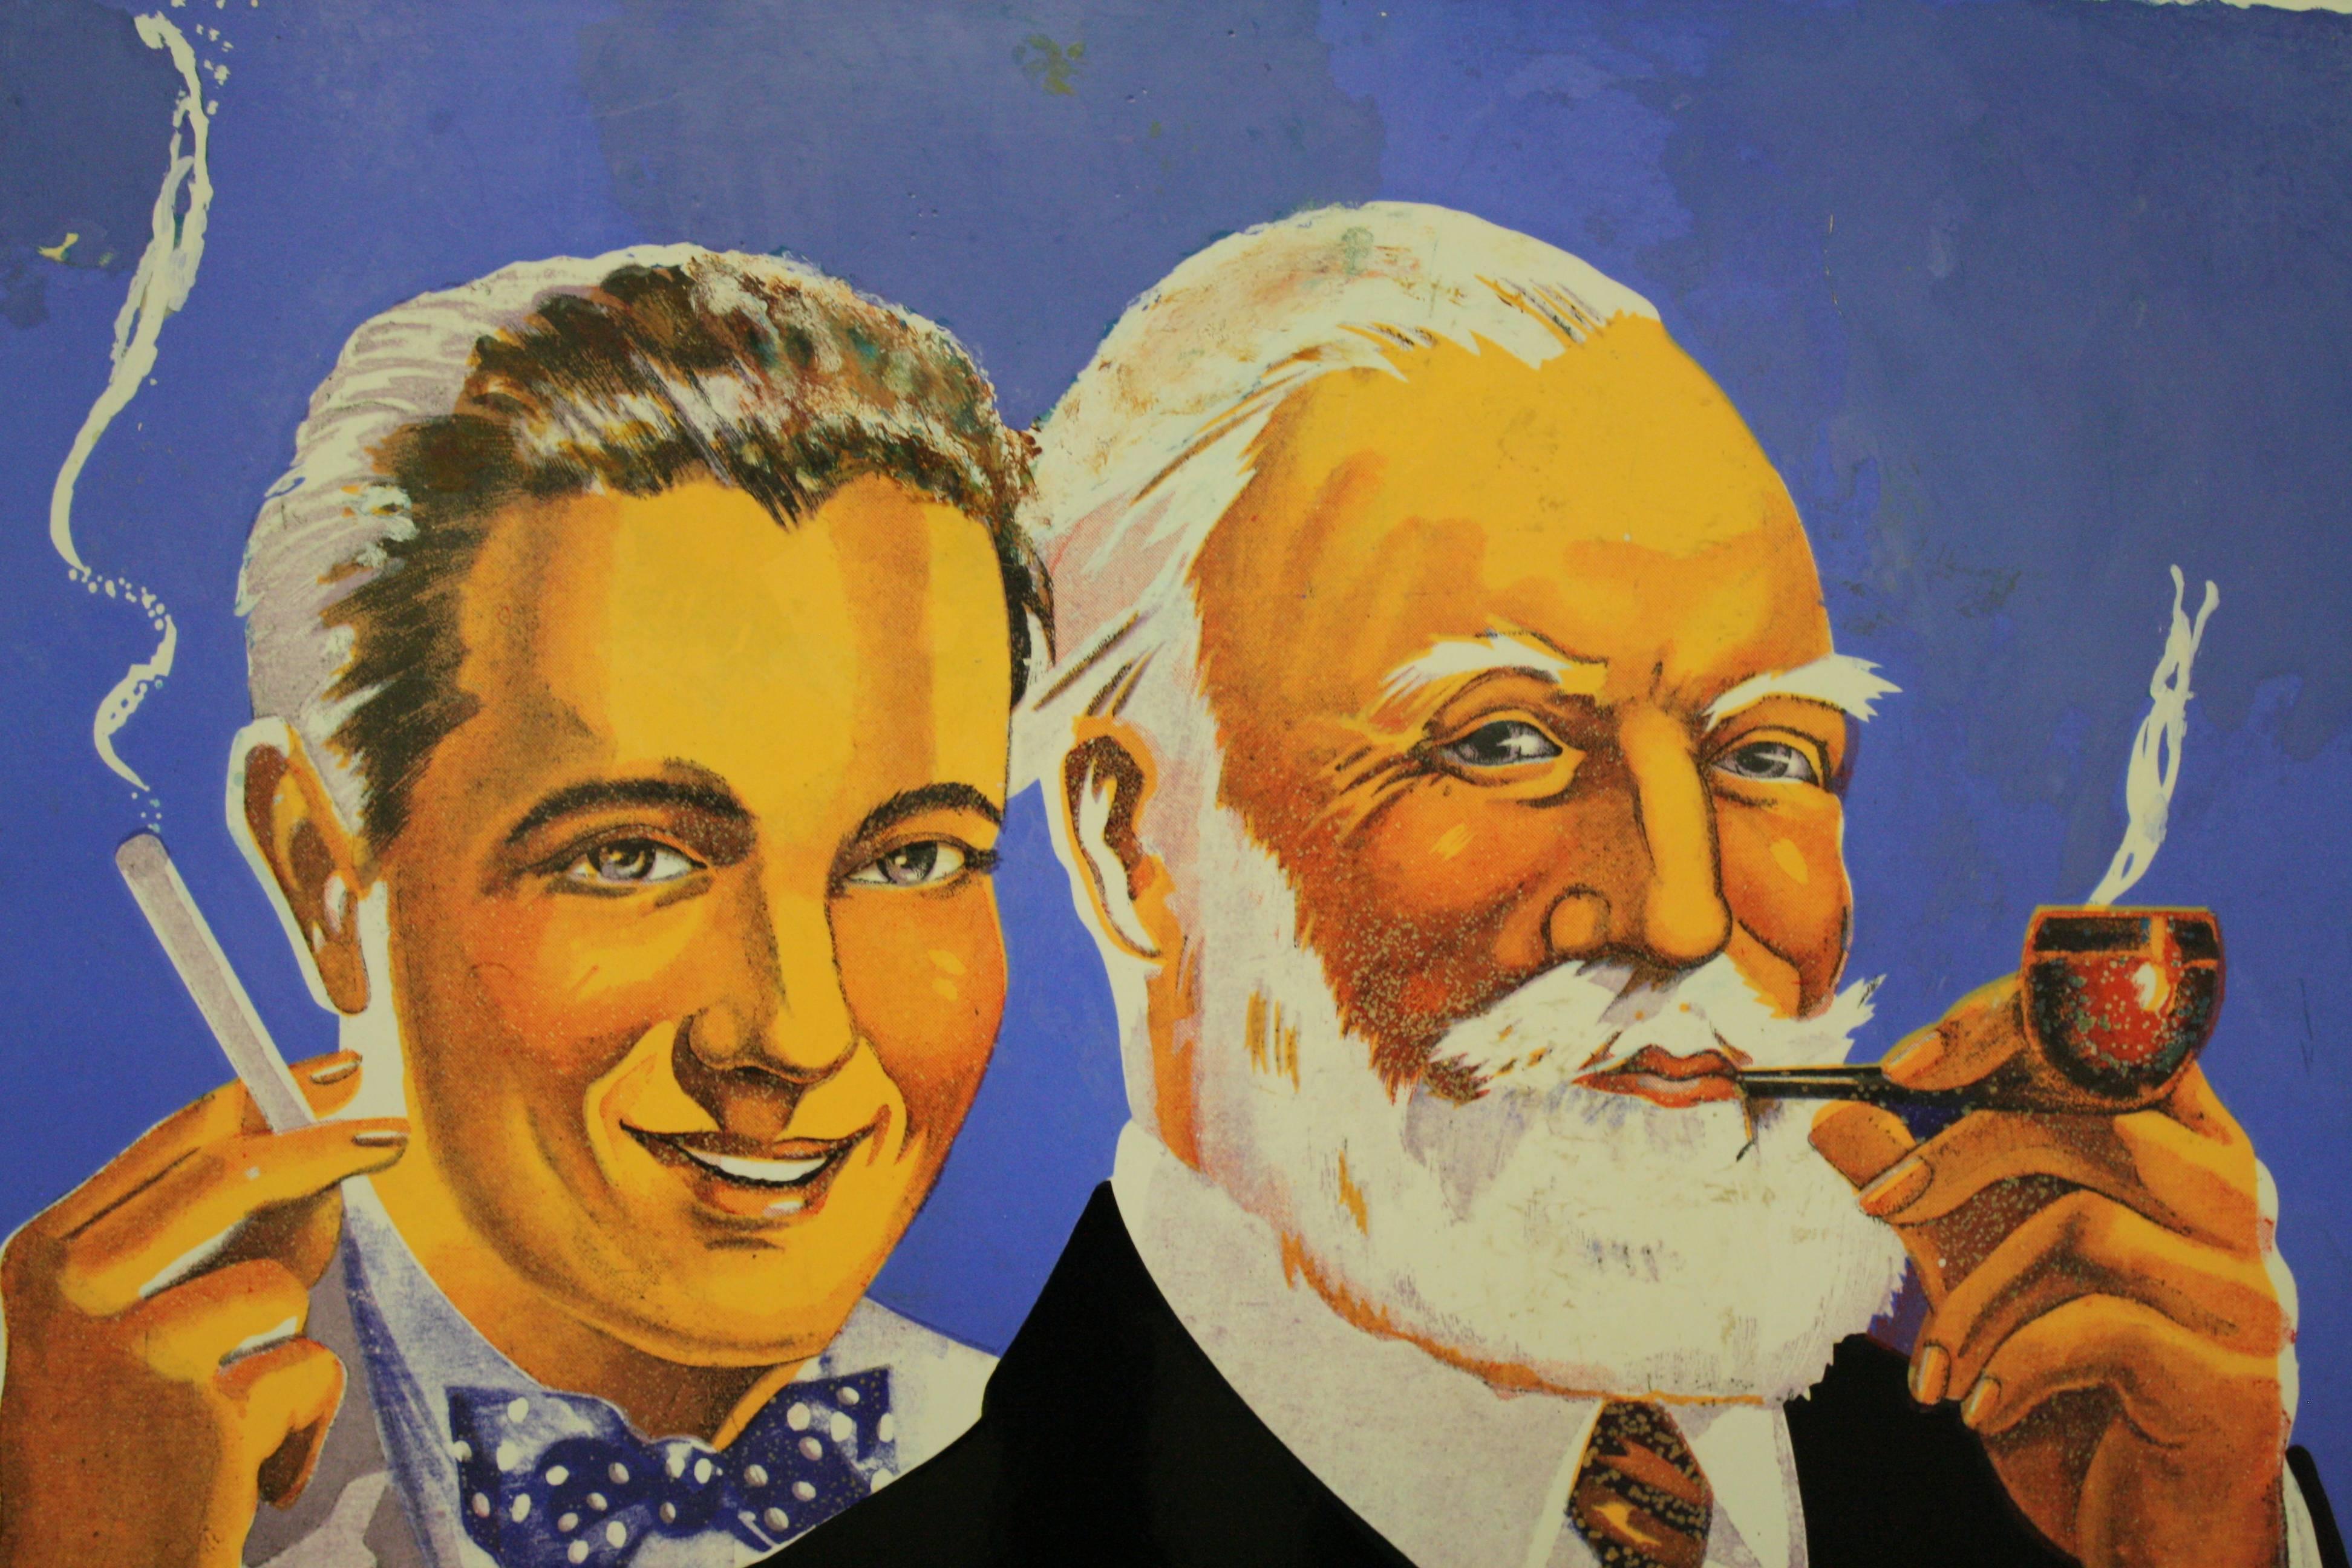 Beautiful tobacco advertising sign 'AJJA'.

The sign is made from enameled metal and has some slight wear.

The image of the two man casually smoking with a happy expression makes the sign so lively.

This type of advertising would be